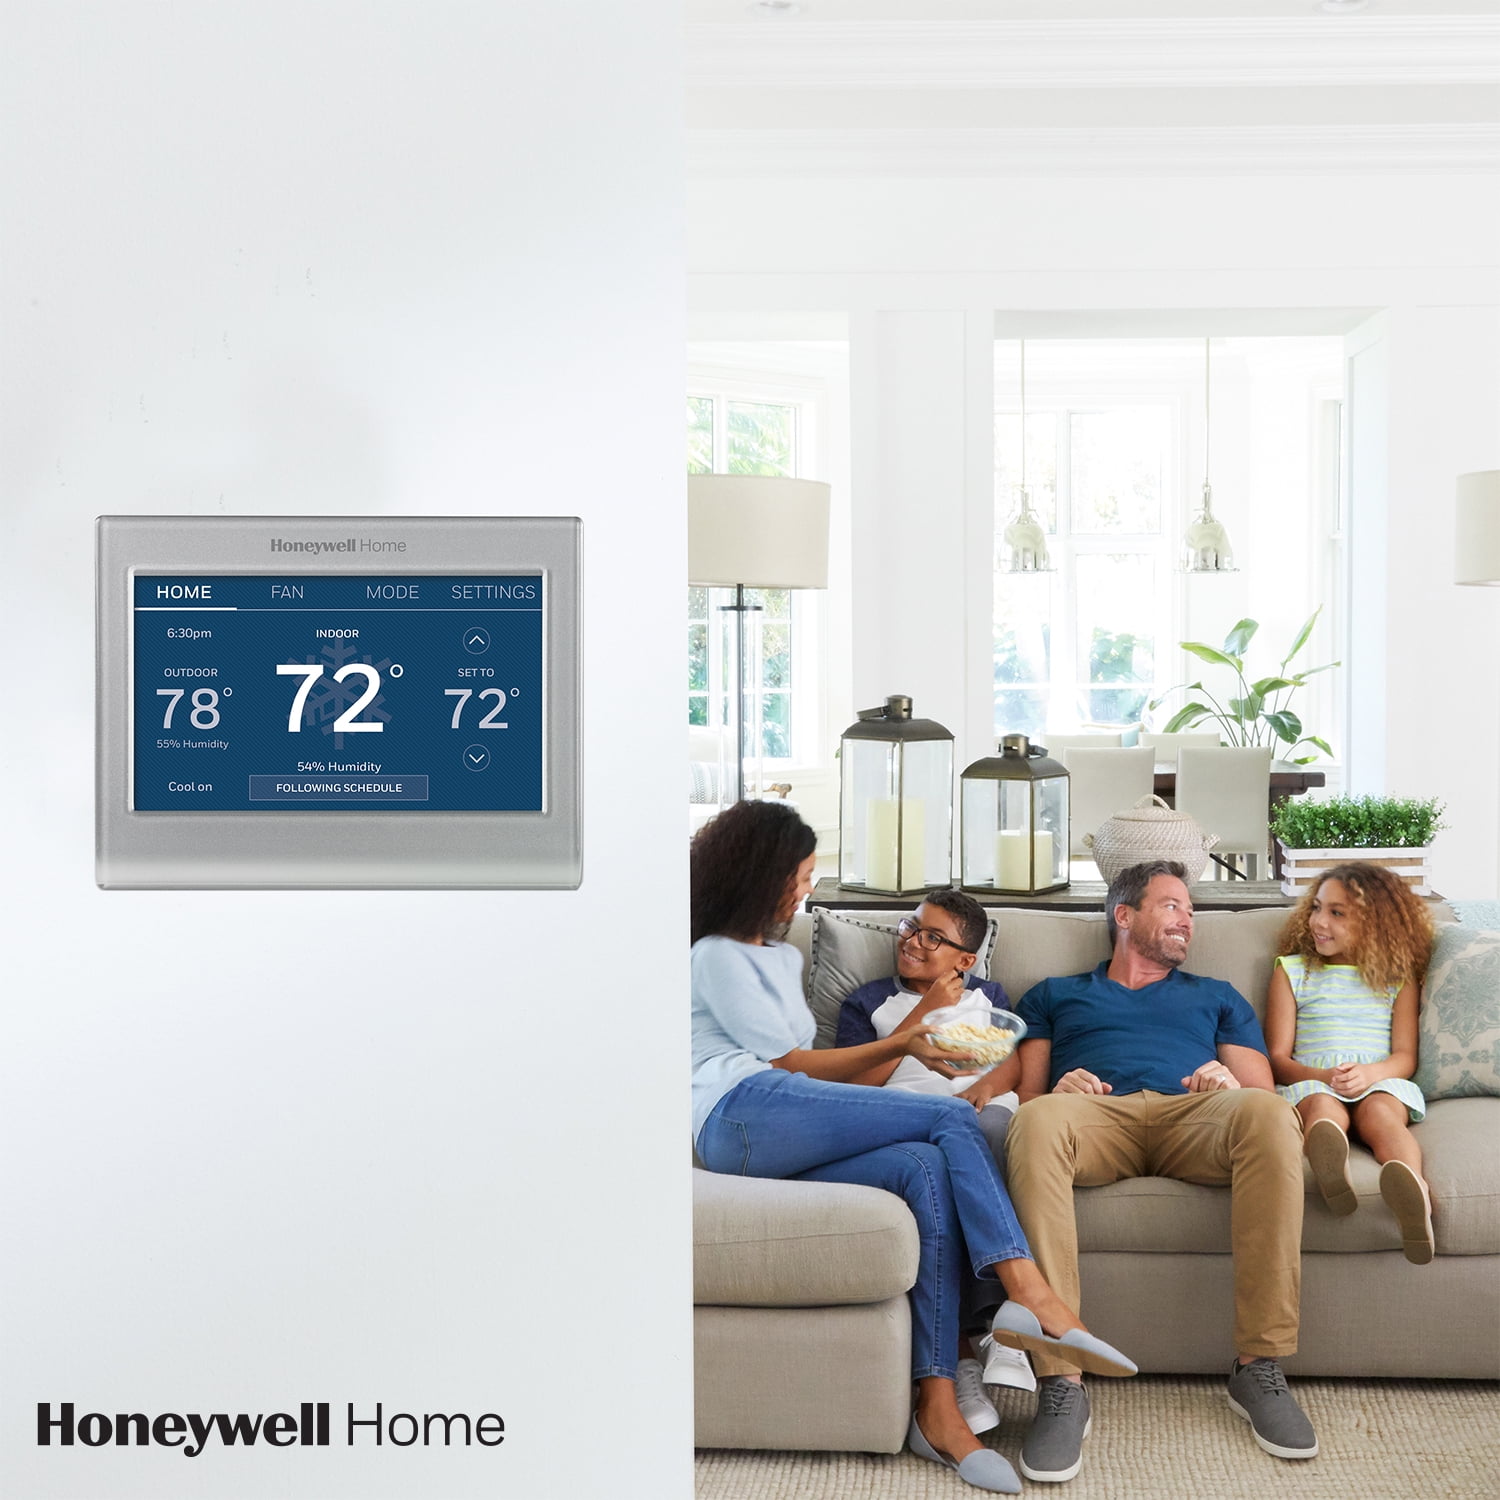 Honeywell Home Smart Color Thermostat